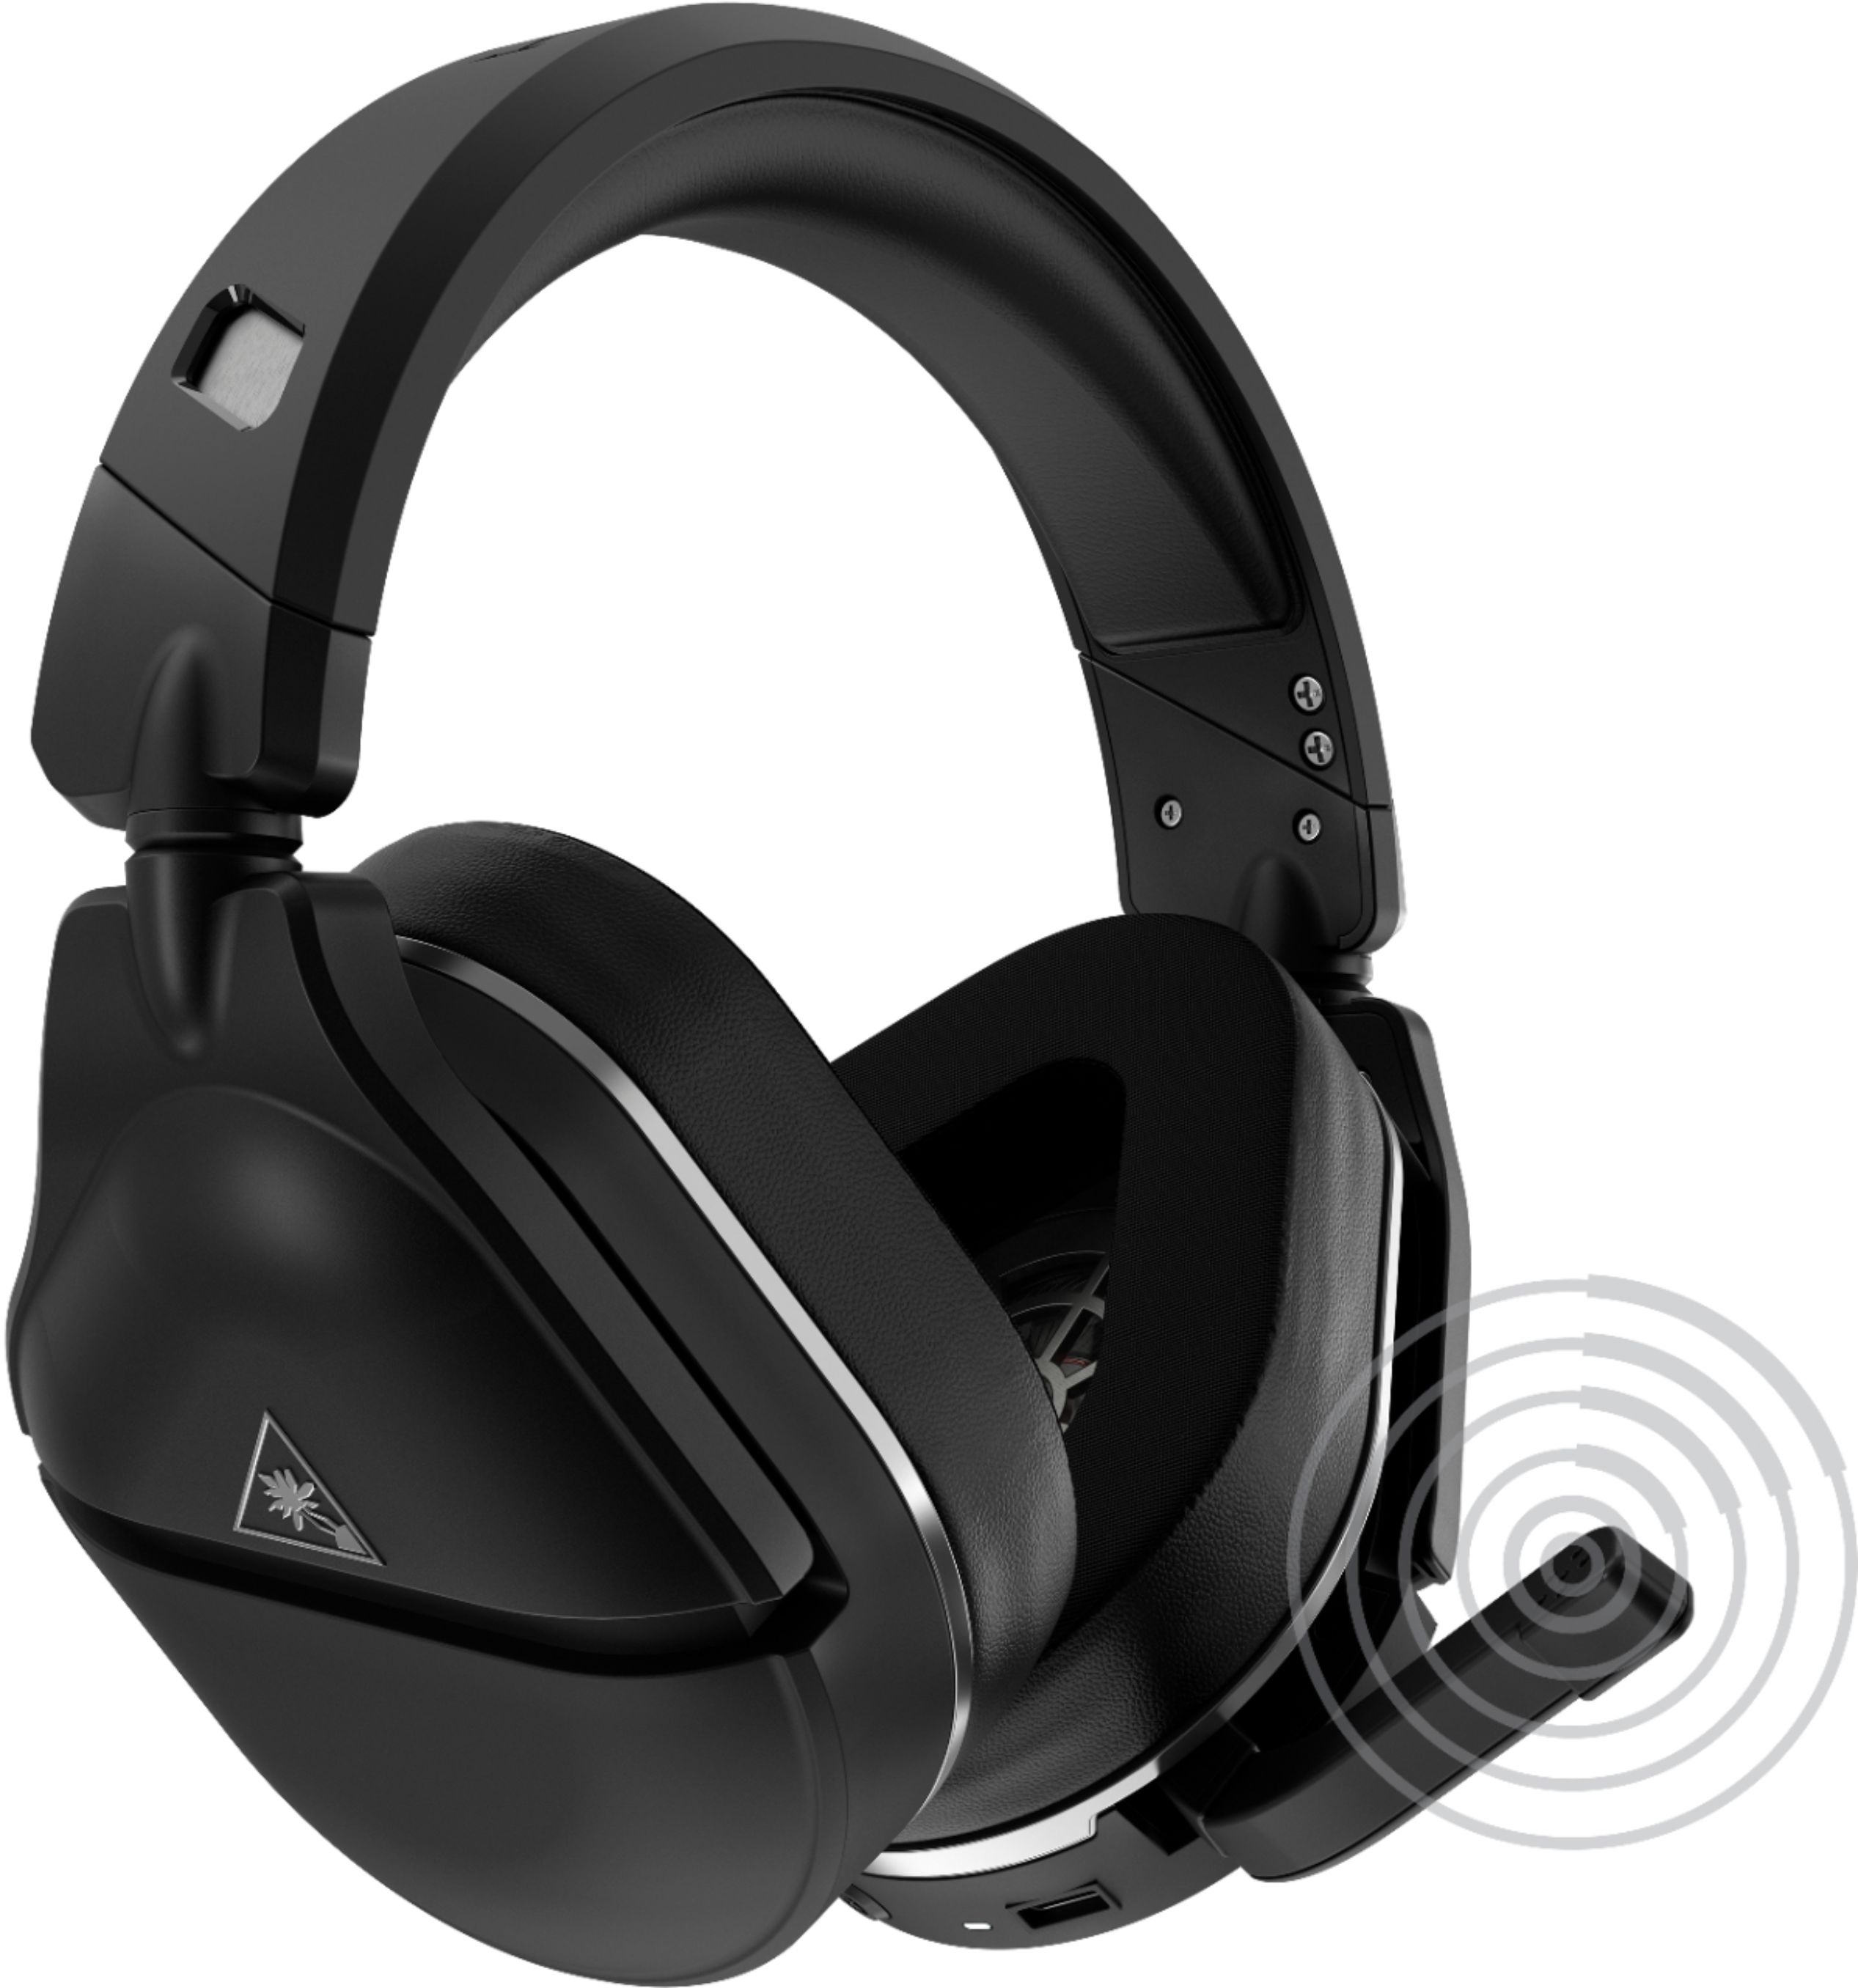 baas schilder priester Best Buy: Turtle Beach Stealth 700 Gen 2 Wireless Gaming Headset Black for  PlayStation 5, PlayStation 4 & Nintendo Switch with Bluetooth Black/Silver  TBS-3780-01